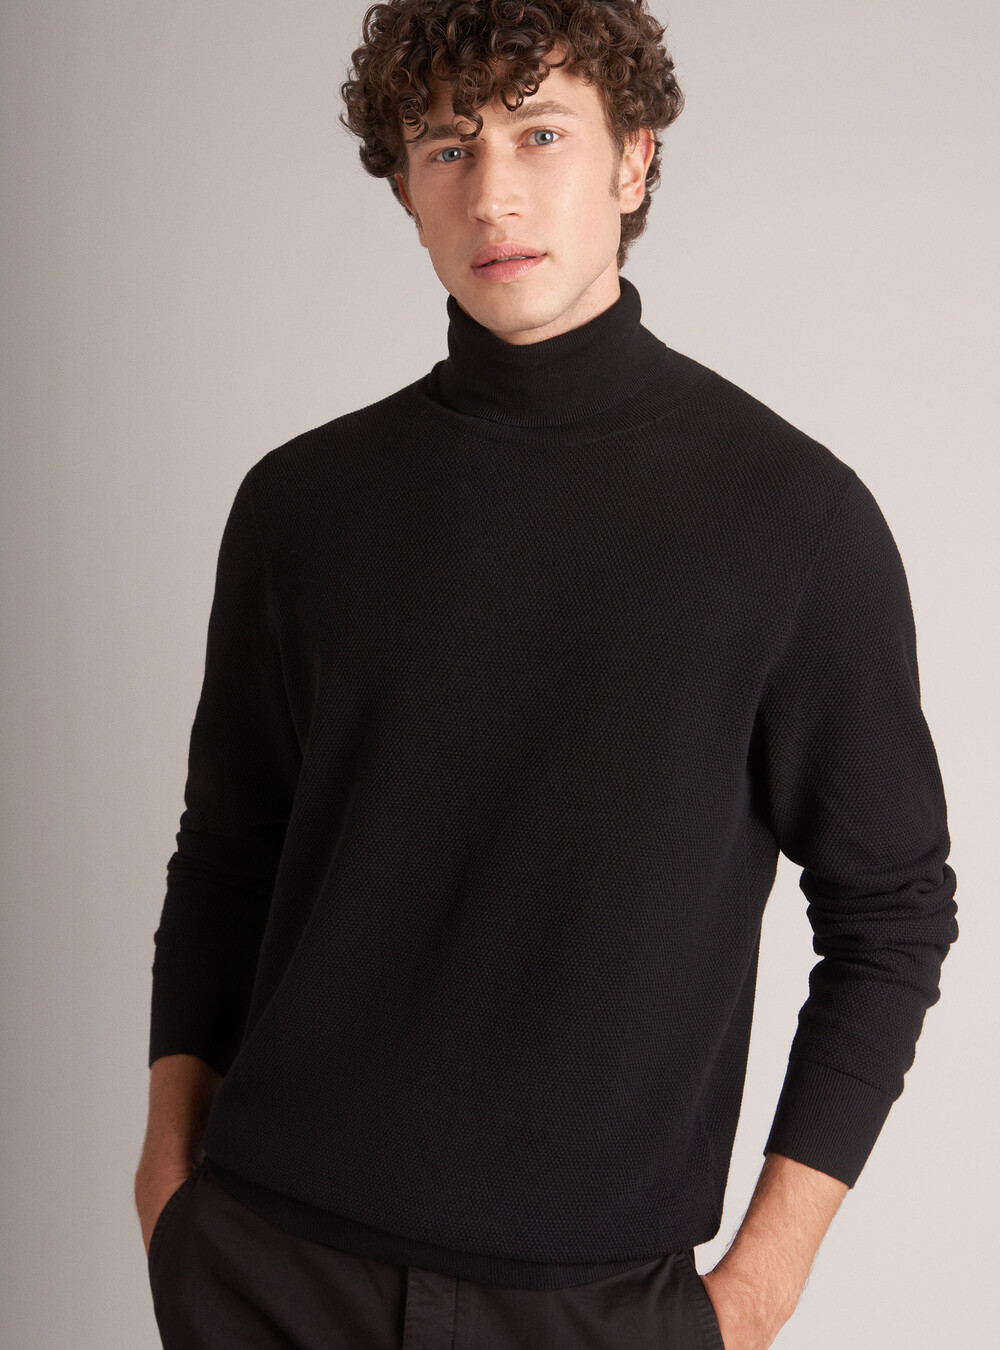 Rice stitch cotton and cashmere high neck sweater